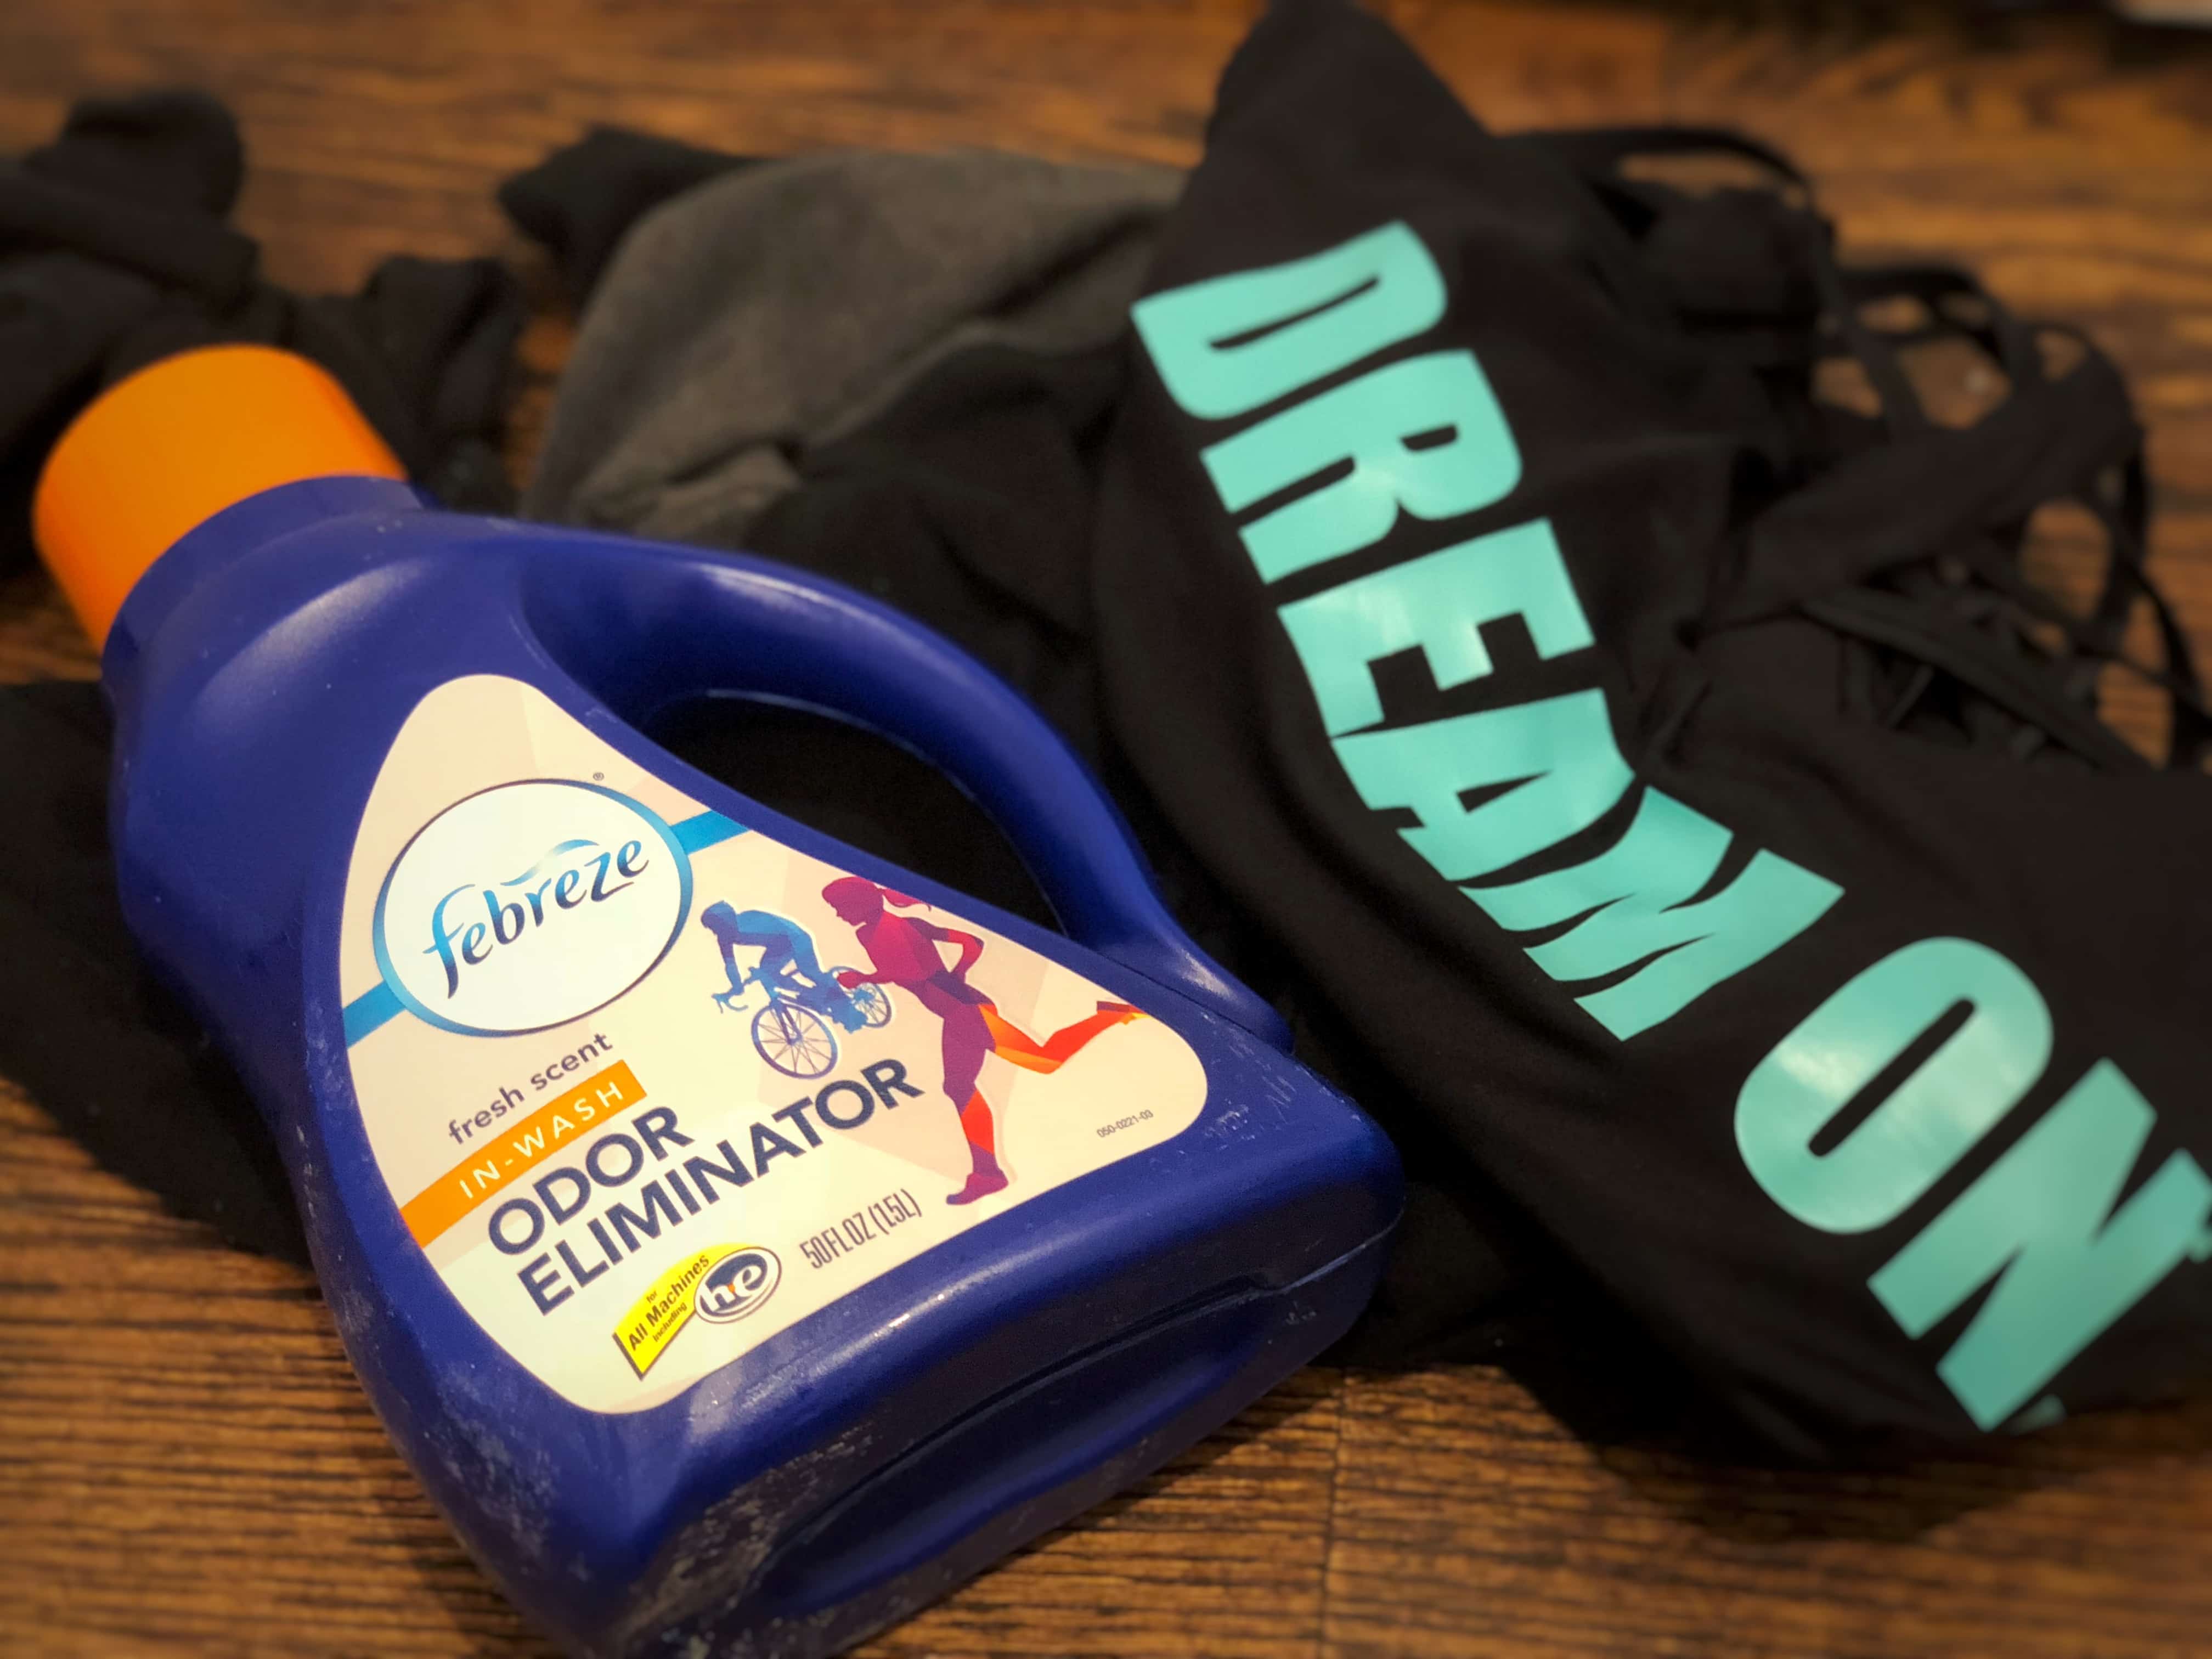 Exercise with the Kids febreze in wash odor eliminator